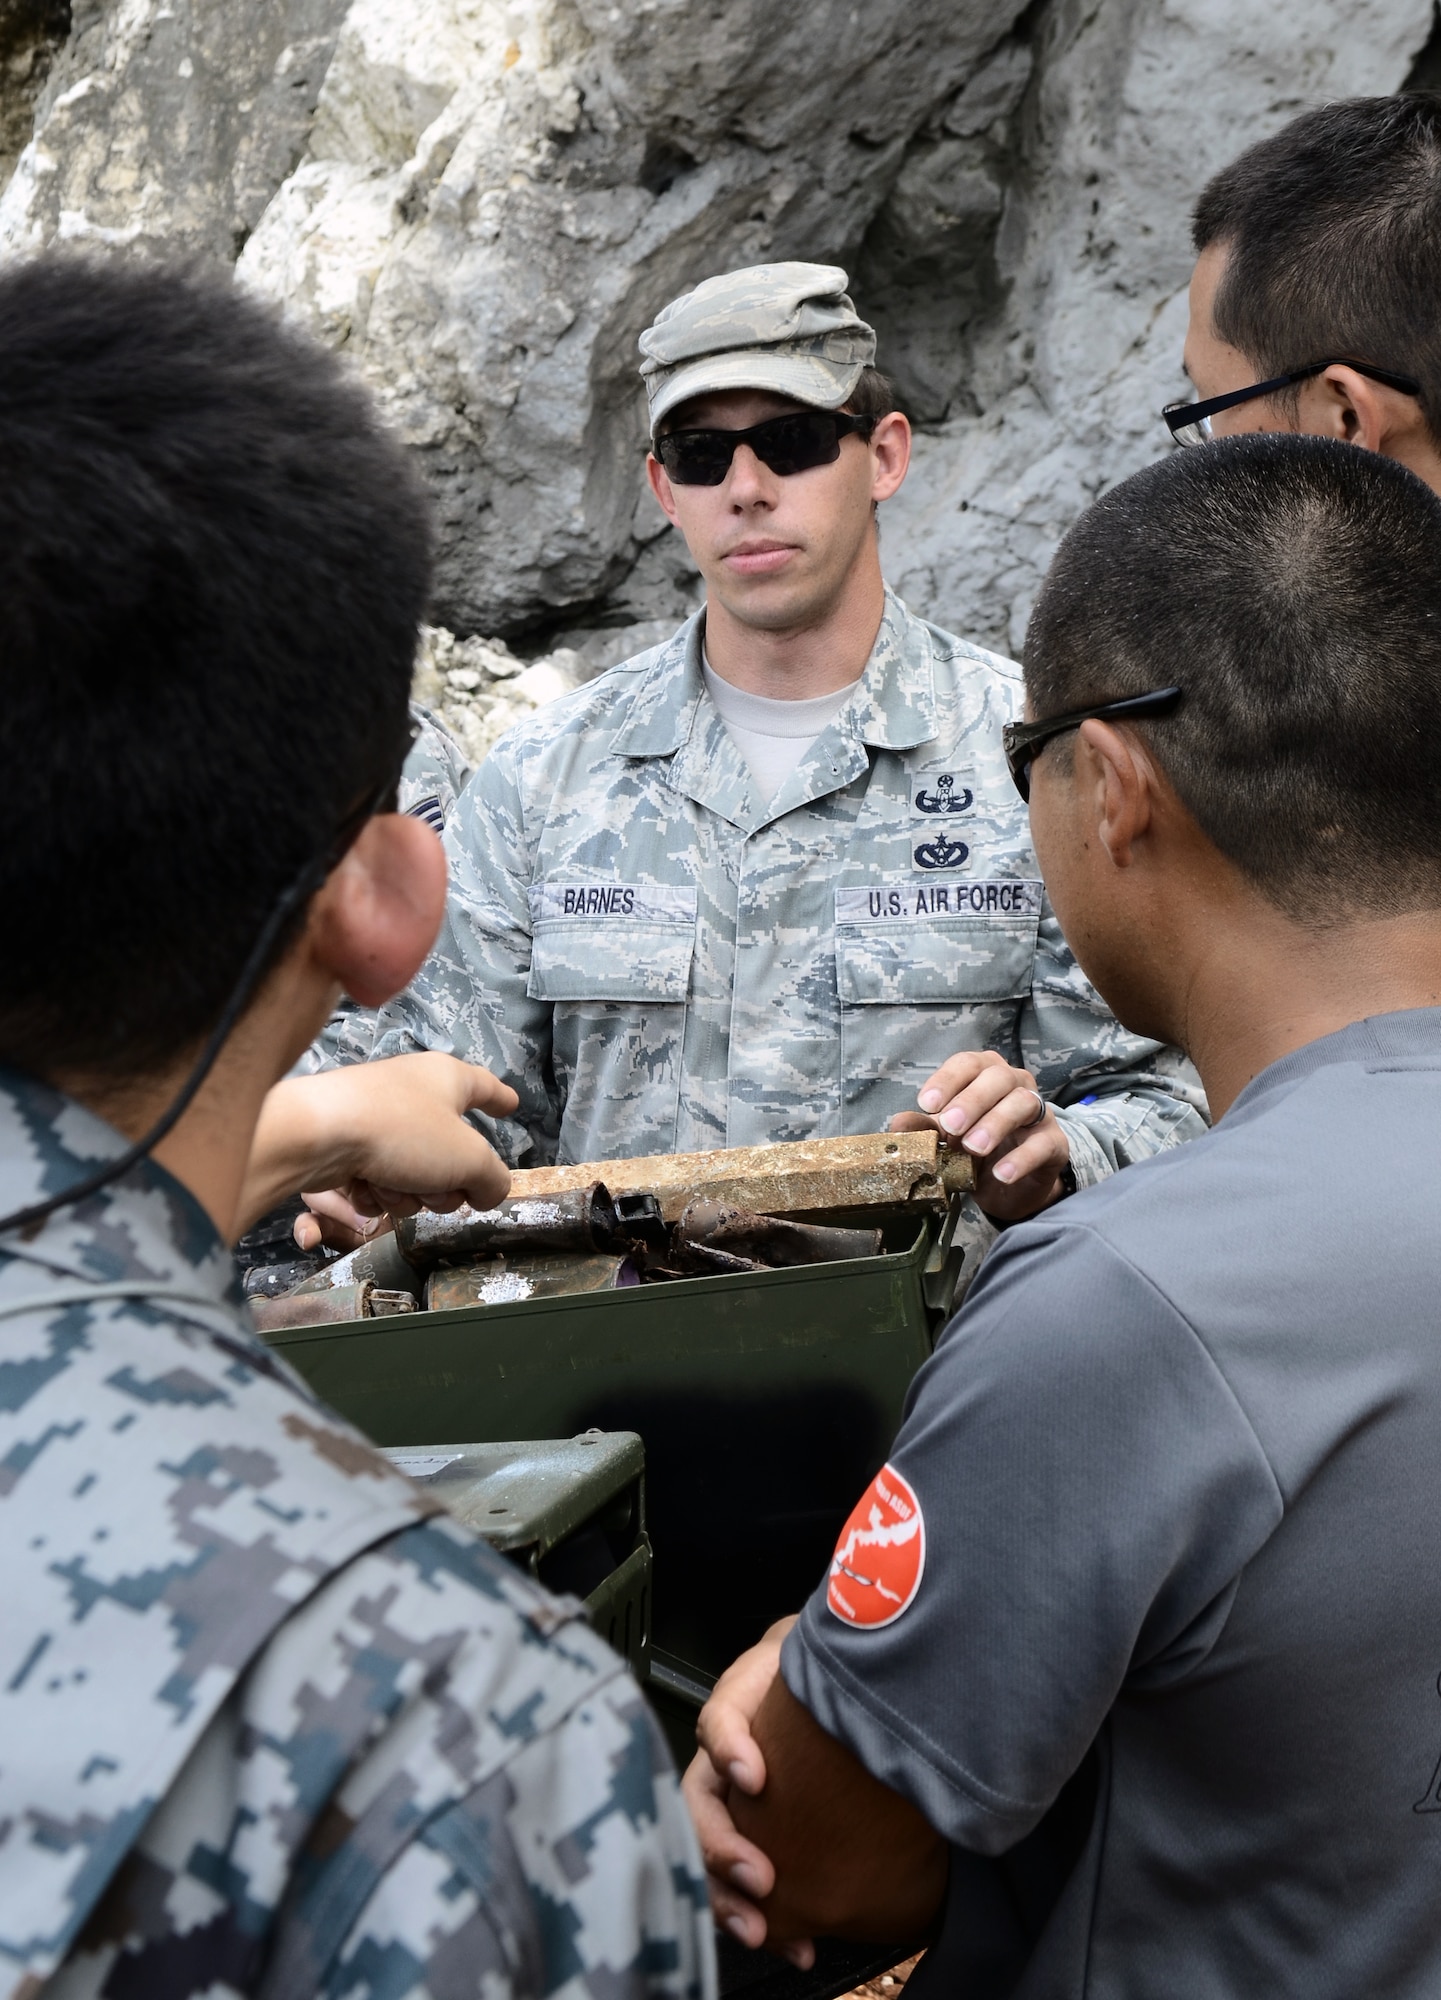 Tech. Sgt. Gabriel Barnes, 36th Civil Engineer Squadron Explosive Ordnance Disposal Flight craftsman, tells Airmen from the Japan Air Self-Defense Force’s 83rd Air Wing about the variety of unexploded ordnances EOD has dealt with during a cultural exchange Feb. 21, 2014, on Andersen Air Force Base, Guam. The JASDF Airmen were here as part of Exercise Cope North 2014, a multilateral training event designed to improve the mission readiness and combined interoperability of the U.S. Air Force, JASDF, and the Royal Australian Air Force. (U.S. Air Force photo by Airman 1st Class Amanda Morris/Released)